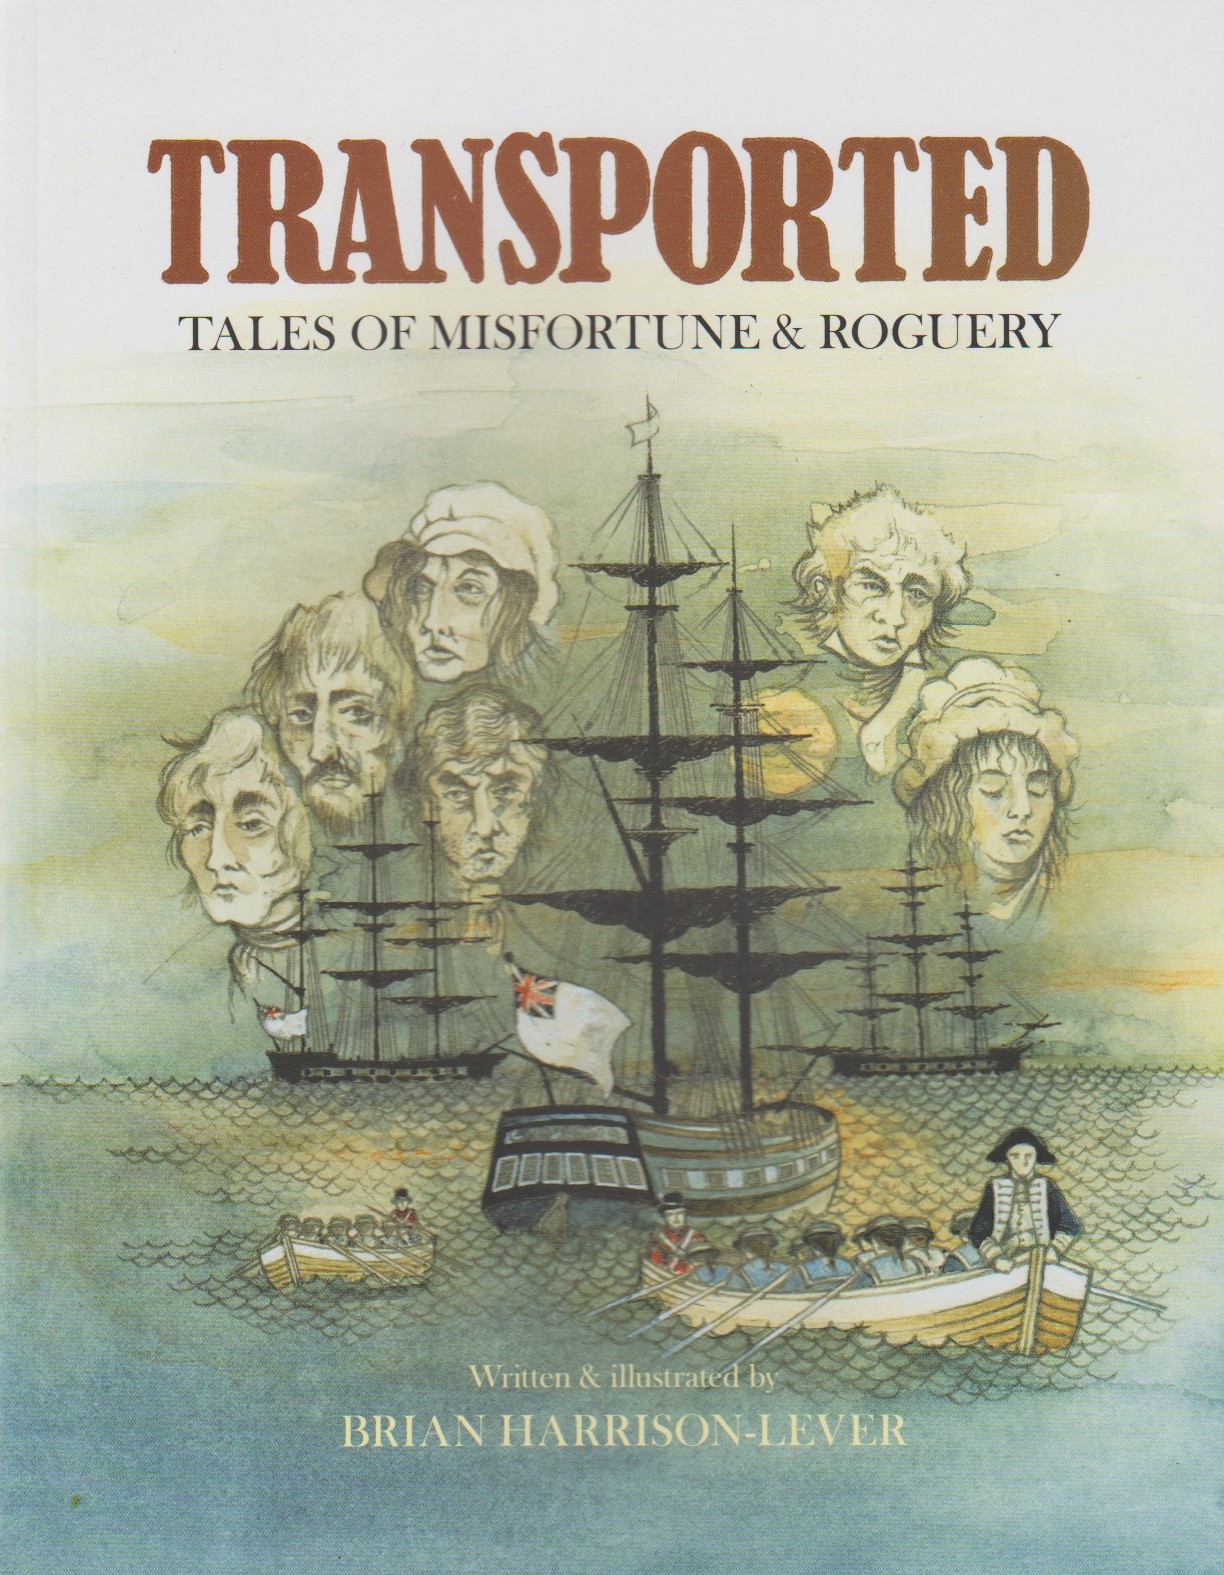 Transported - illustrated tales of misfortune and roguery